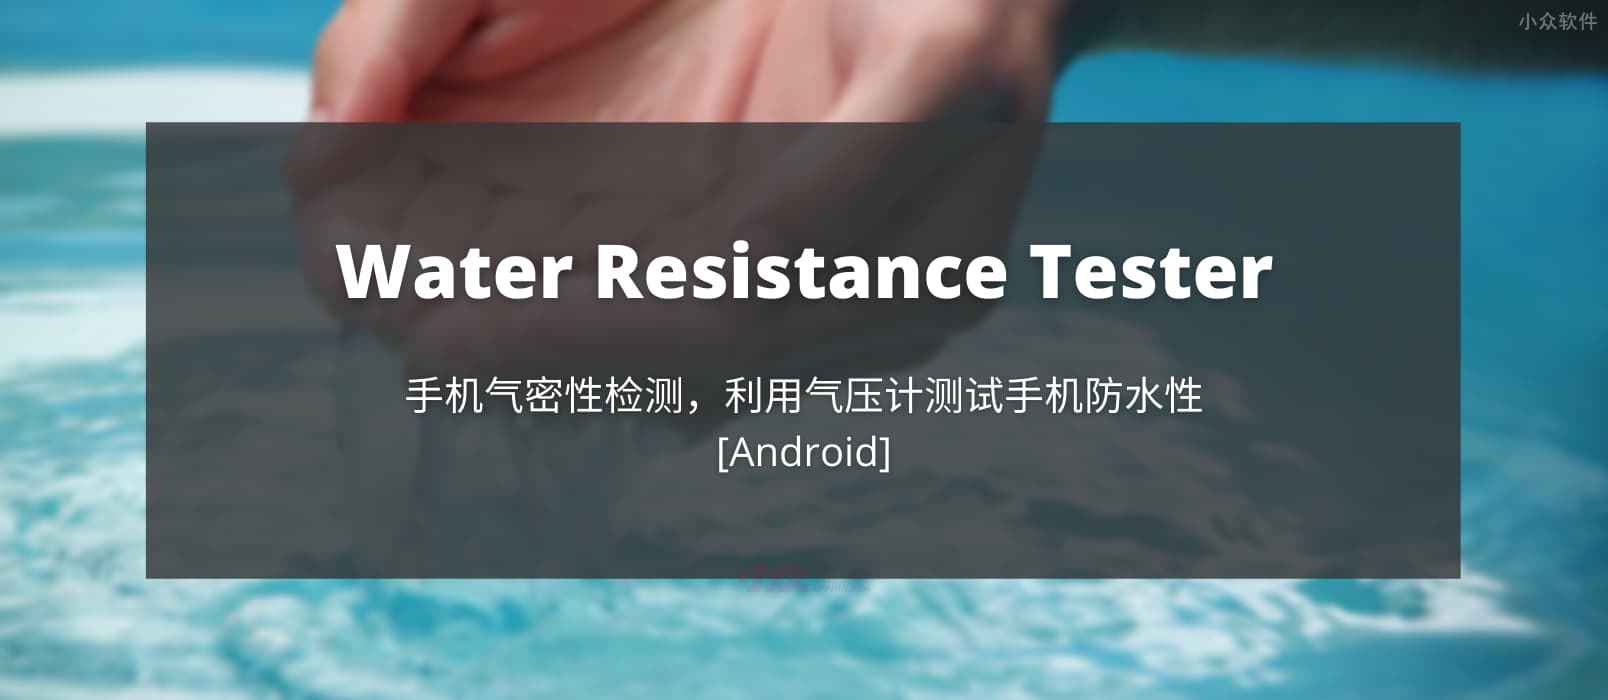 Water Resistance Tester – 手机气密性检测，根据气压计测试手机防水性[Android]